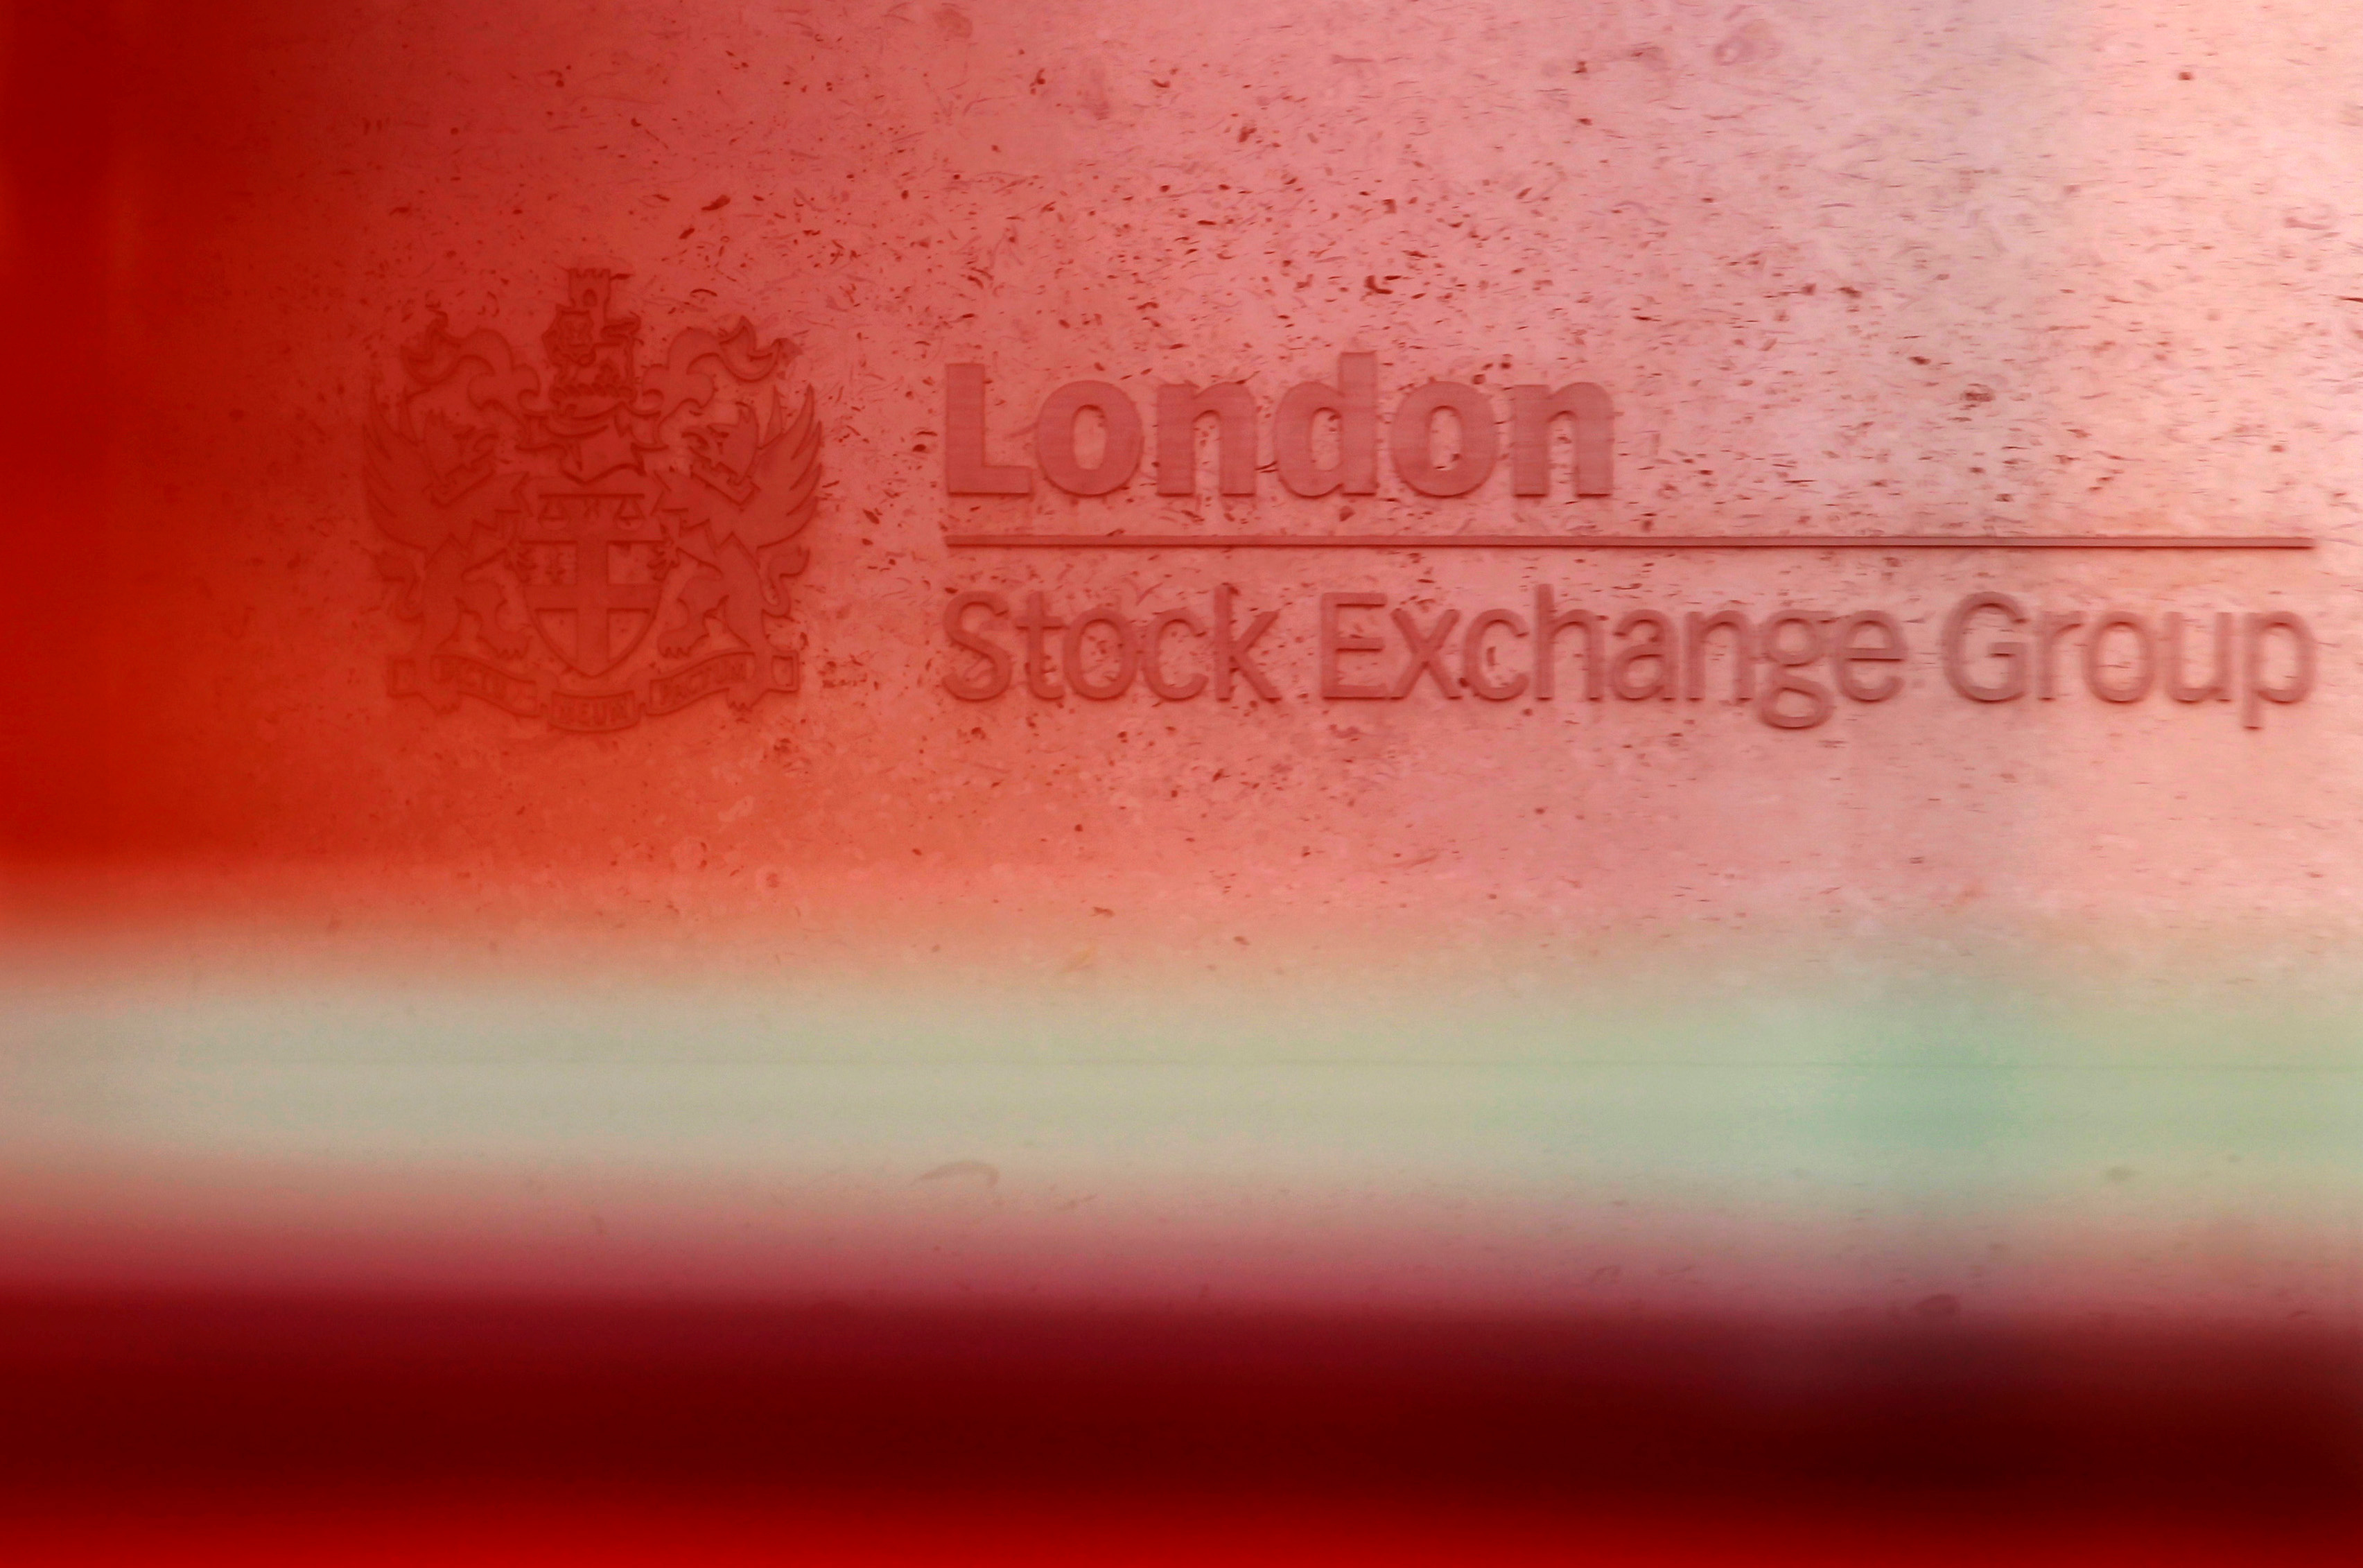 A red London bus passes the Stock Exchange in London